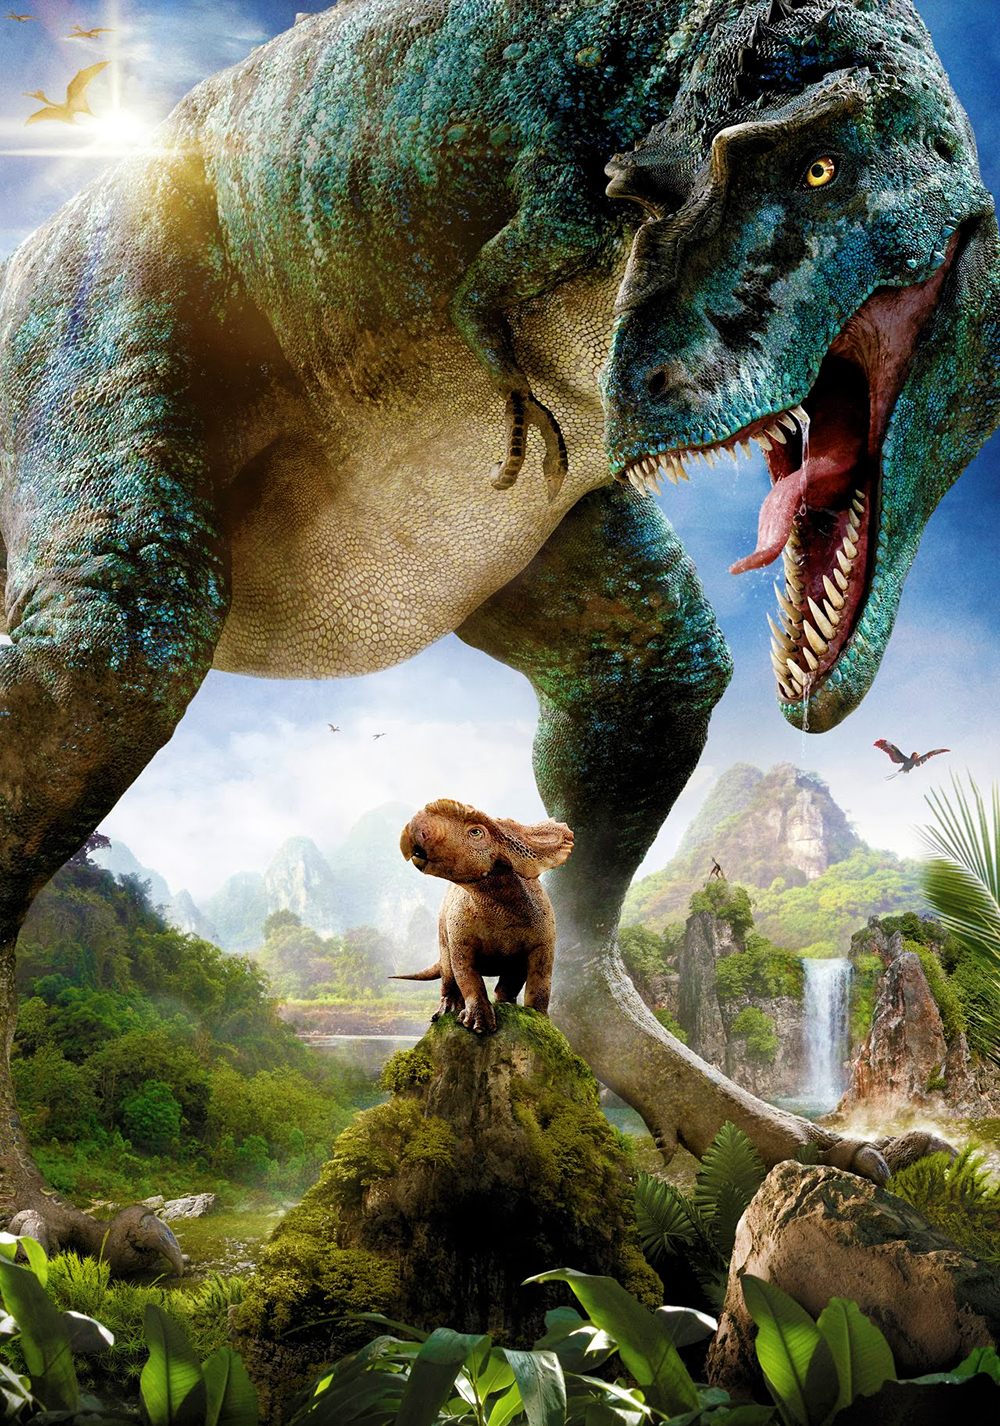 Walking With Dinosaurs Picture